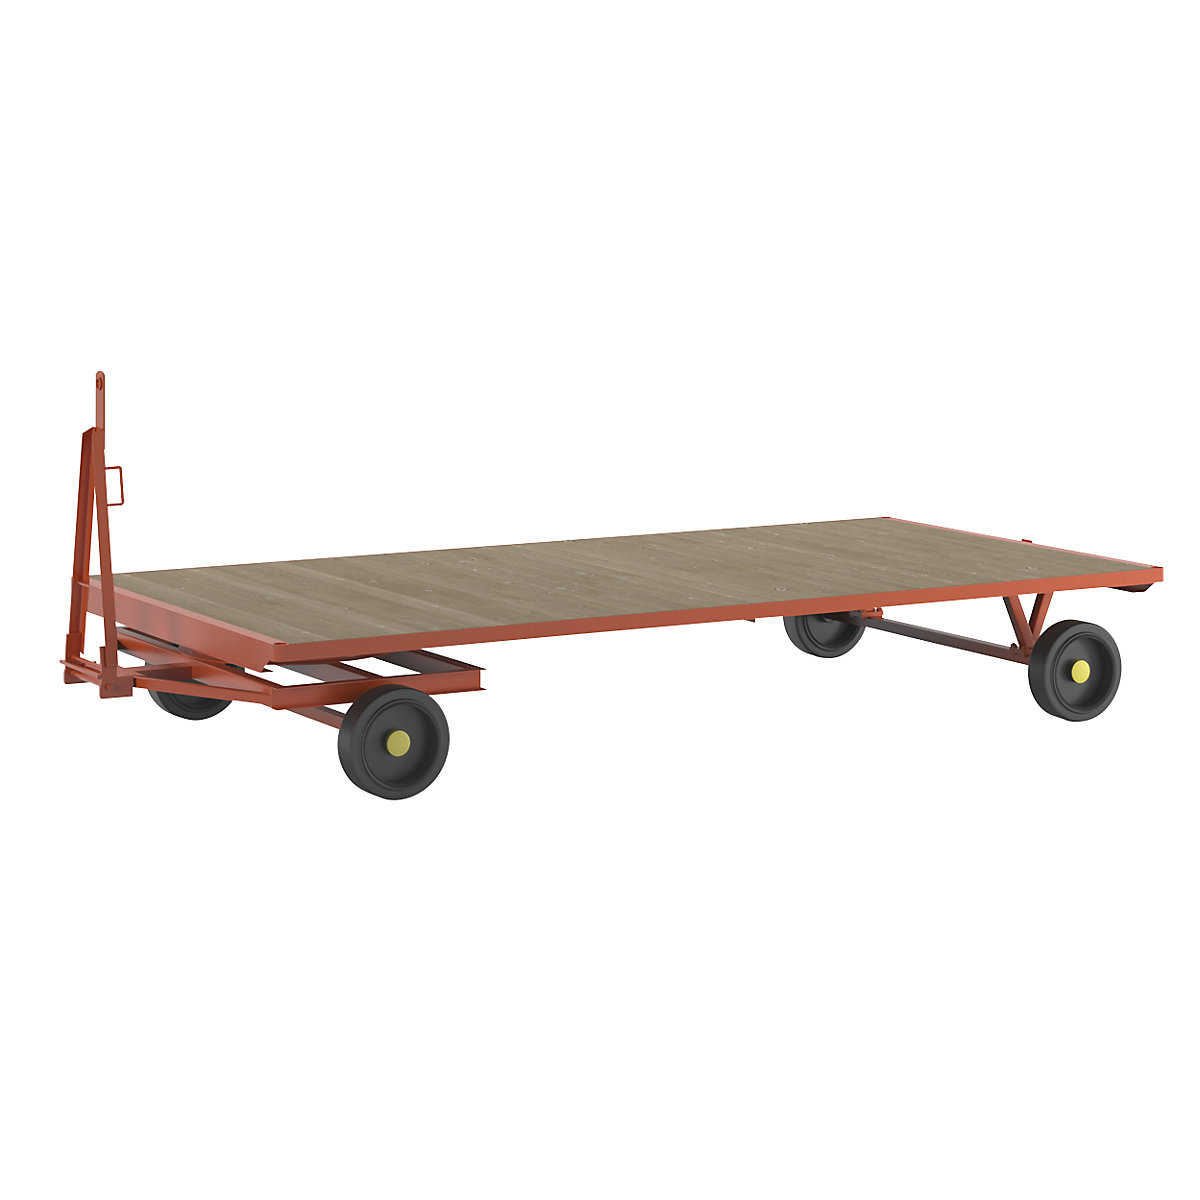 Trailer, 2-wheel turntable steering, max. load 5 t, platform 4.0 x 2.0 m, solid rubber tyres-12